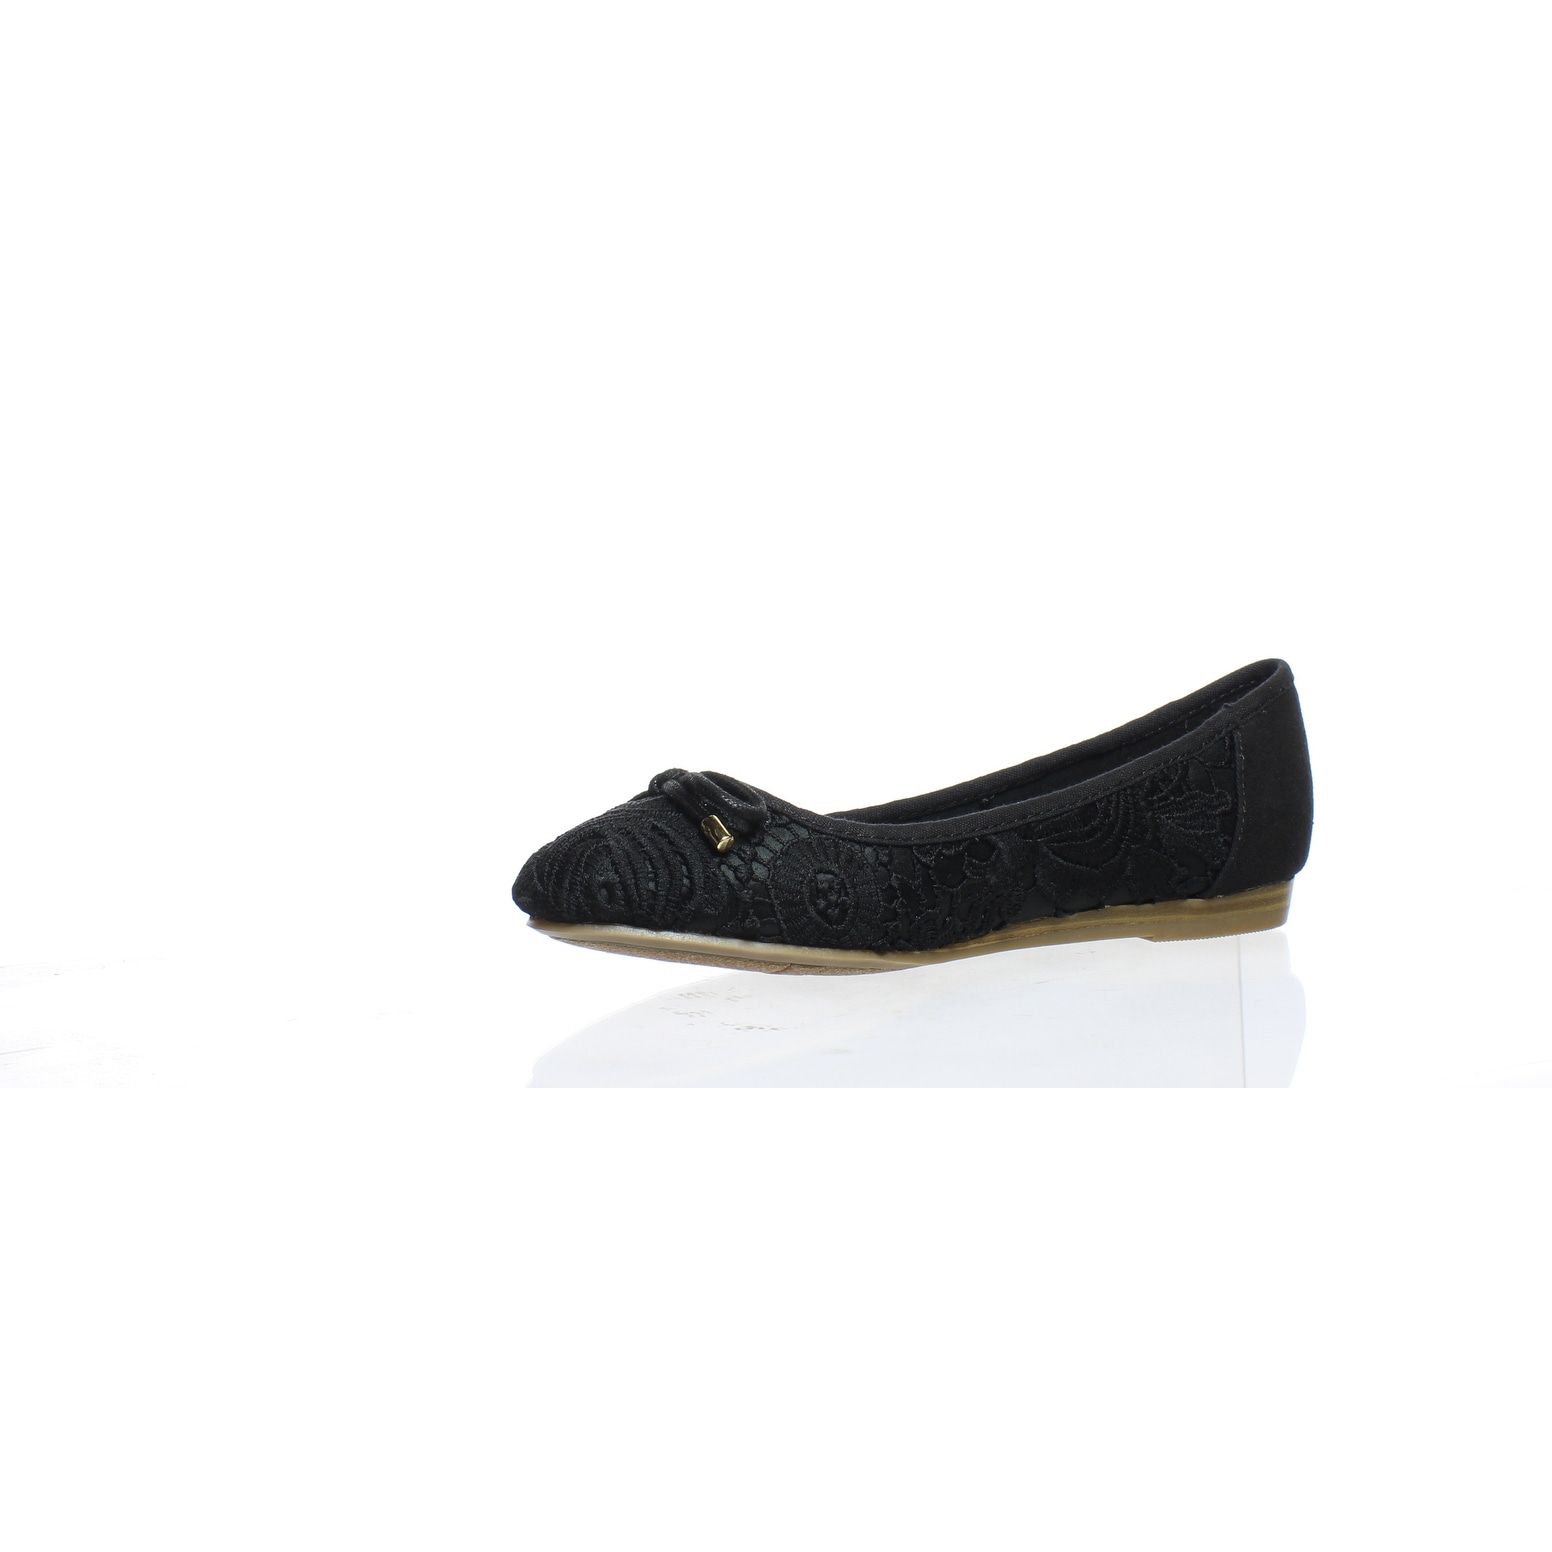 size 5 womens shoes flats